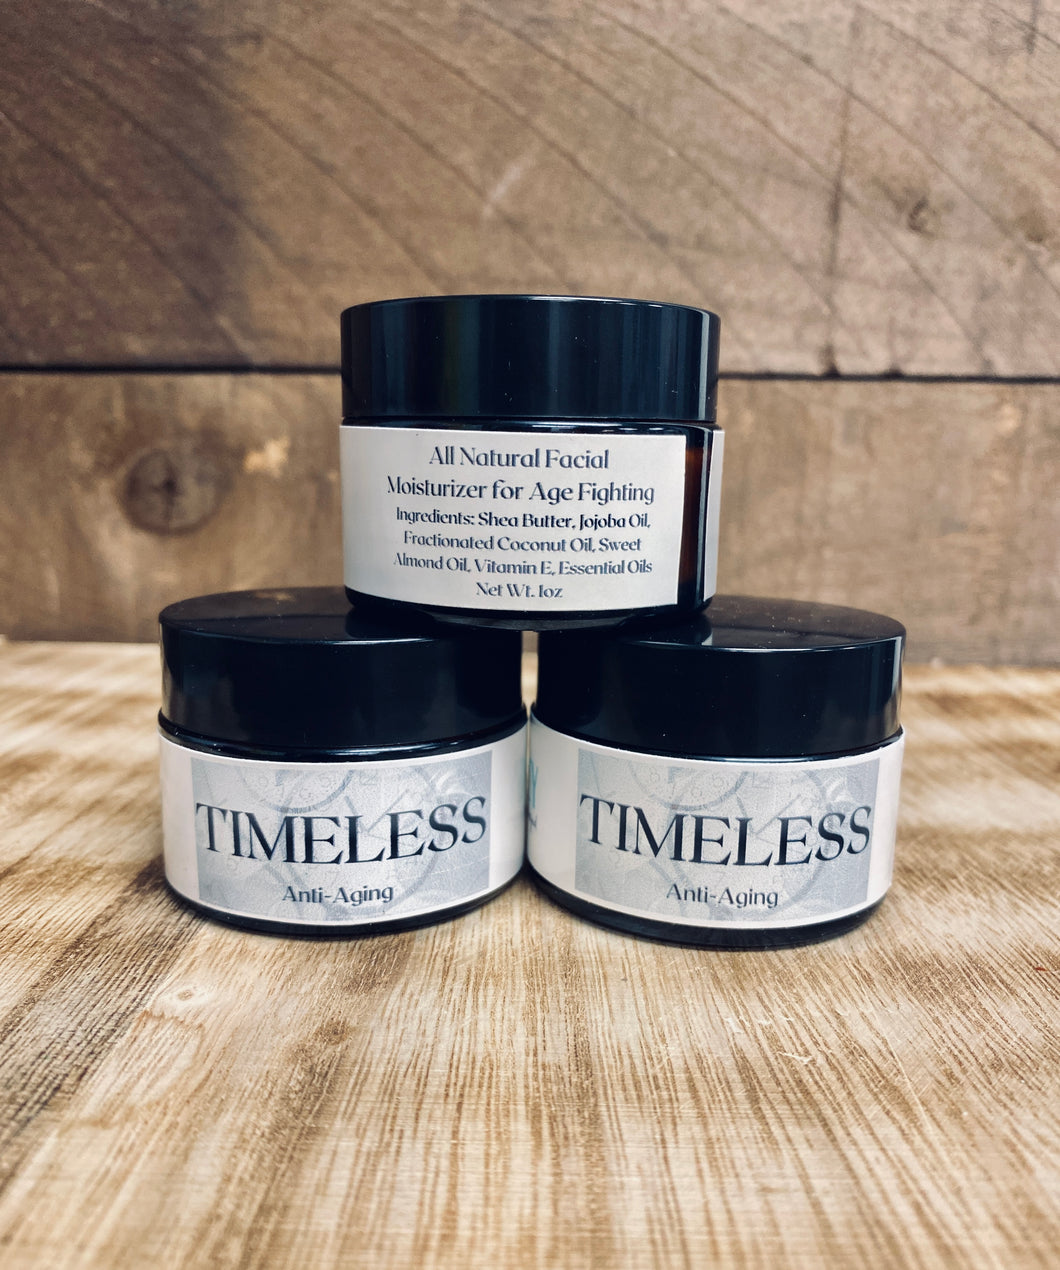 Timeless - Age Fighting Facial Moisturizer